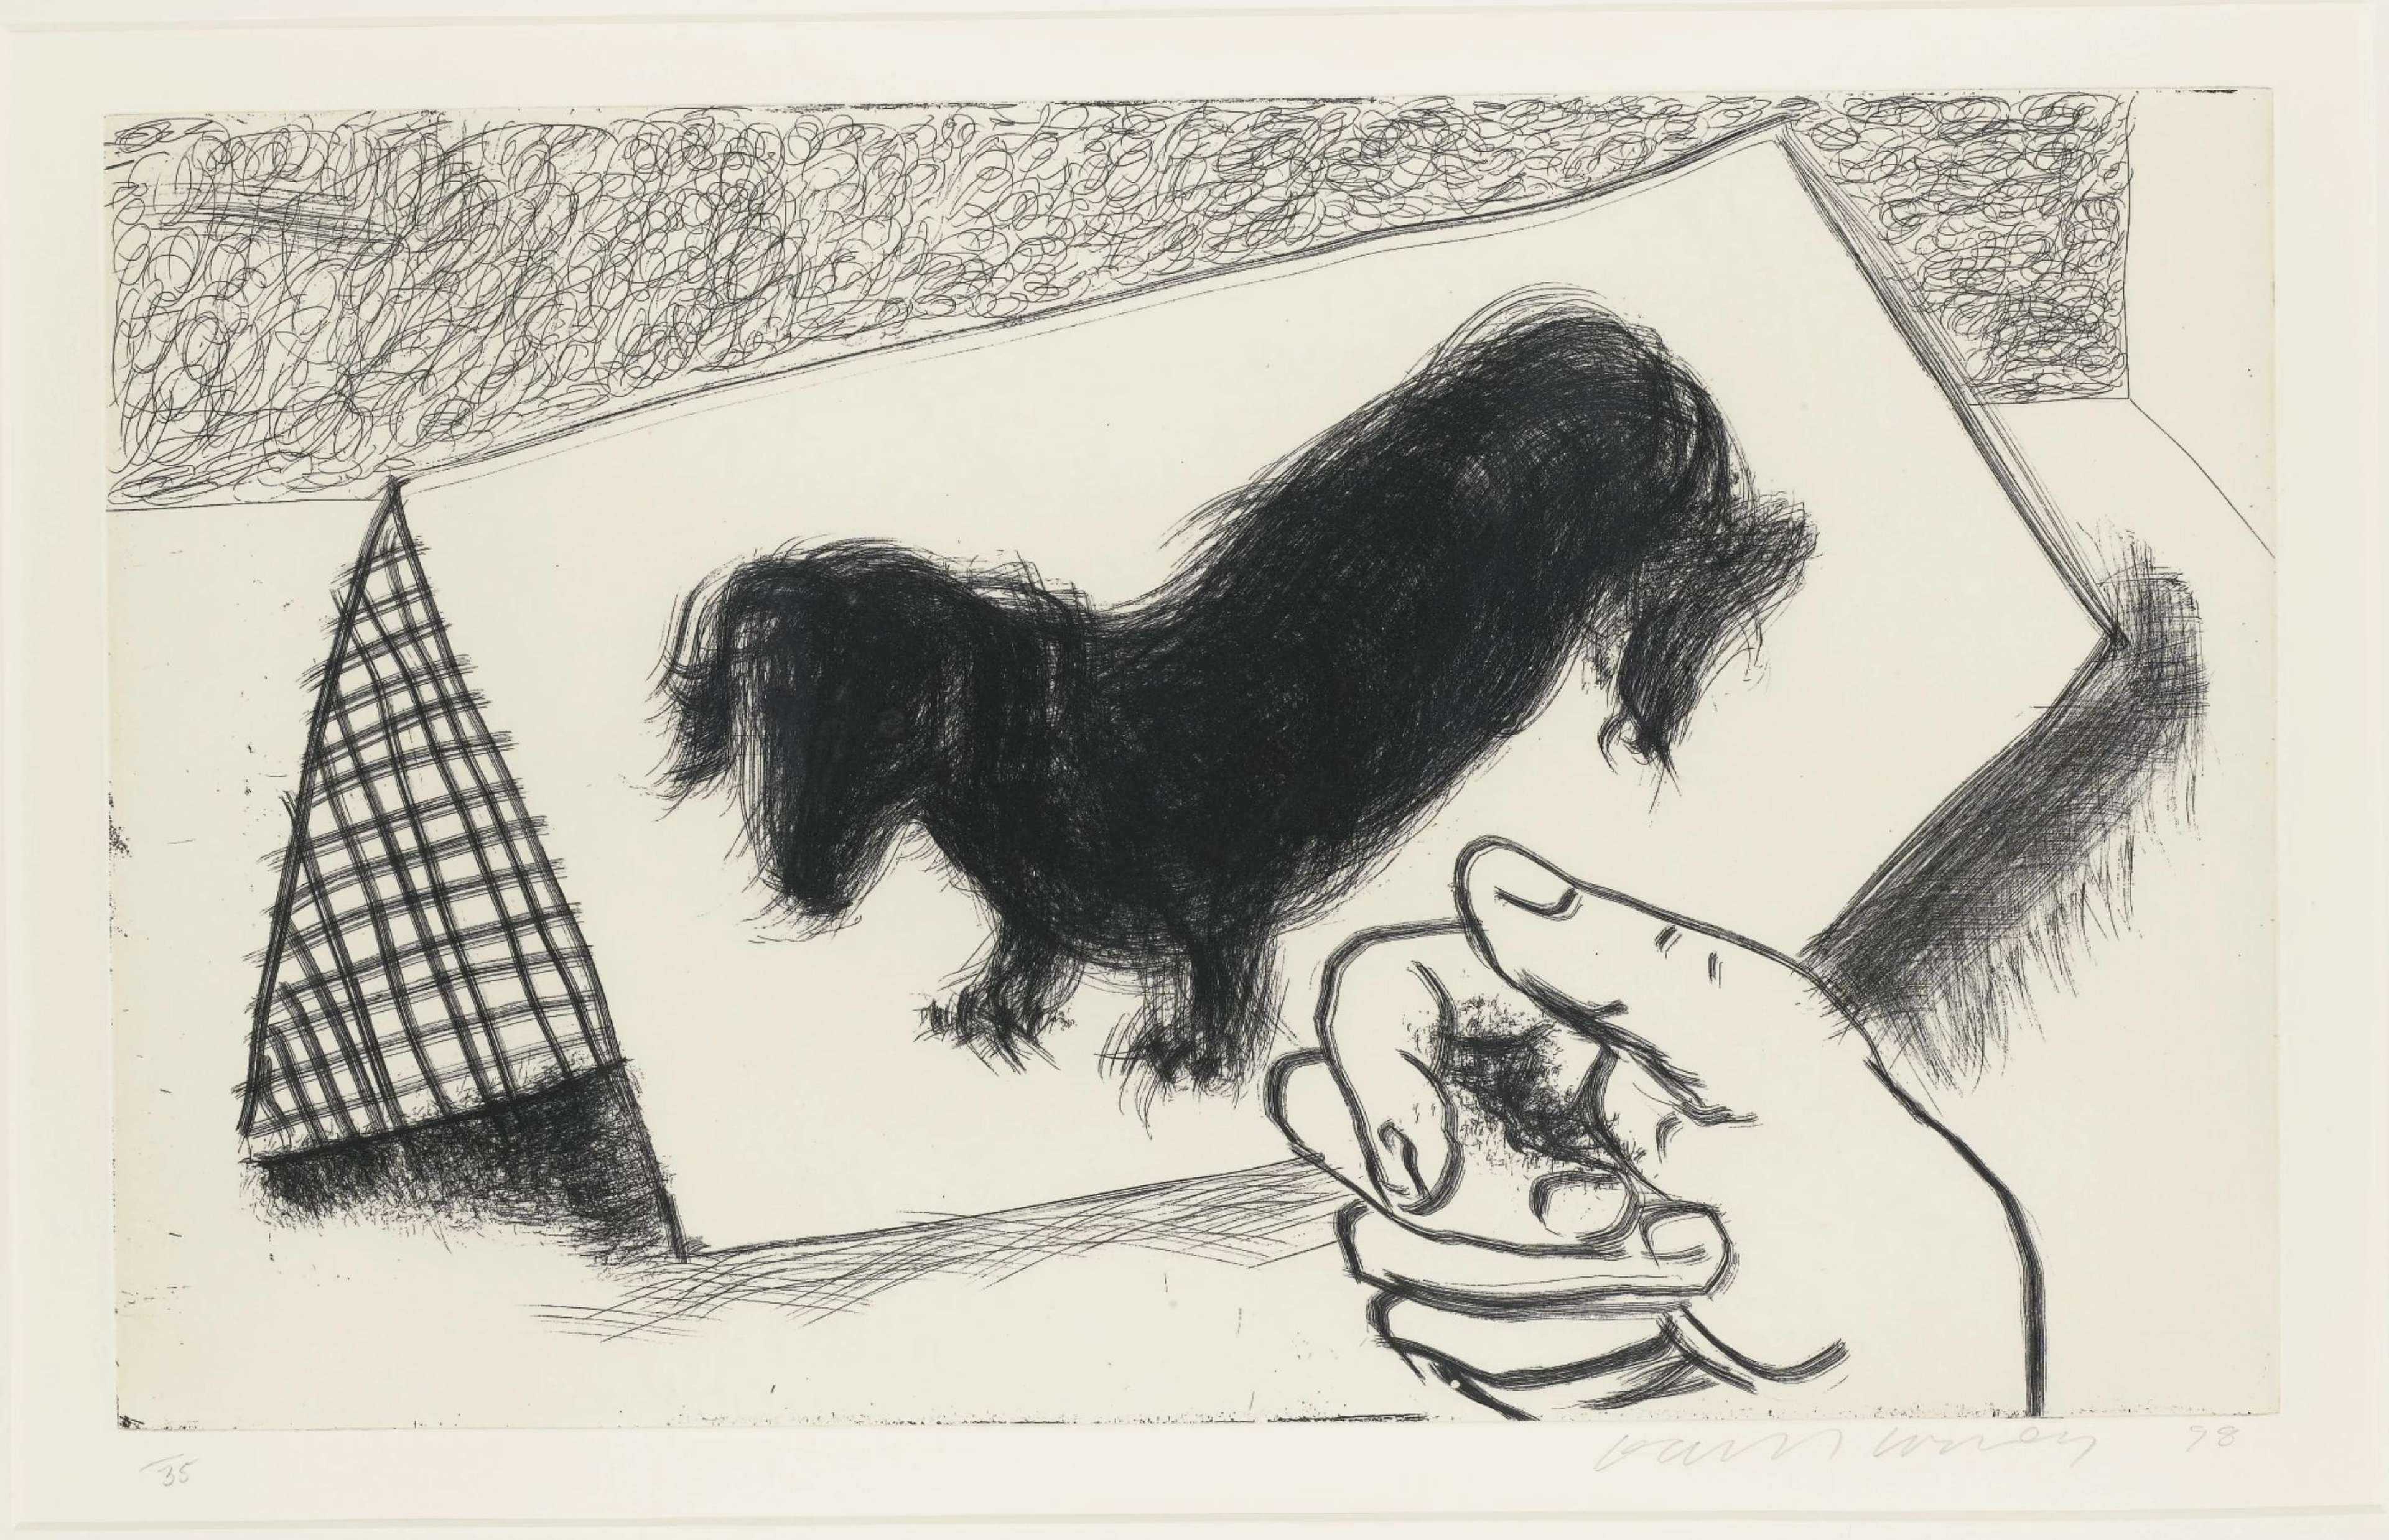 This print is a monochrome portrait of one of Hockney’s dachshunds. However, while most of the series focuses just on the dogs, here we find the composition interrupted by the inclusion of the artist’s own hand, curled up in the foreground as if reaching out from behind the sheet of paper or etching plate he is working on.